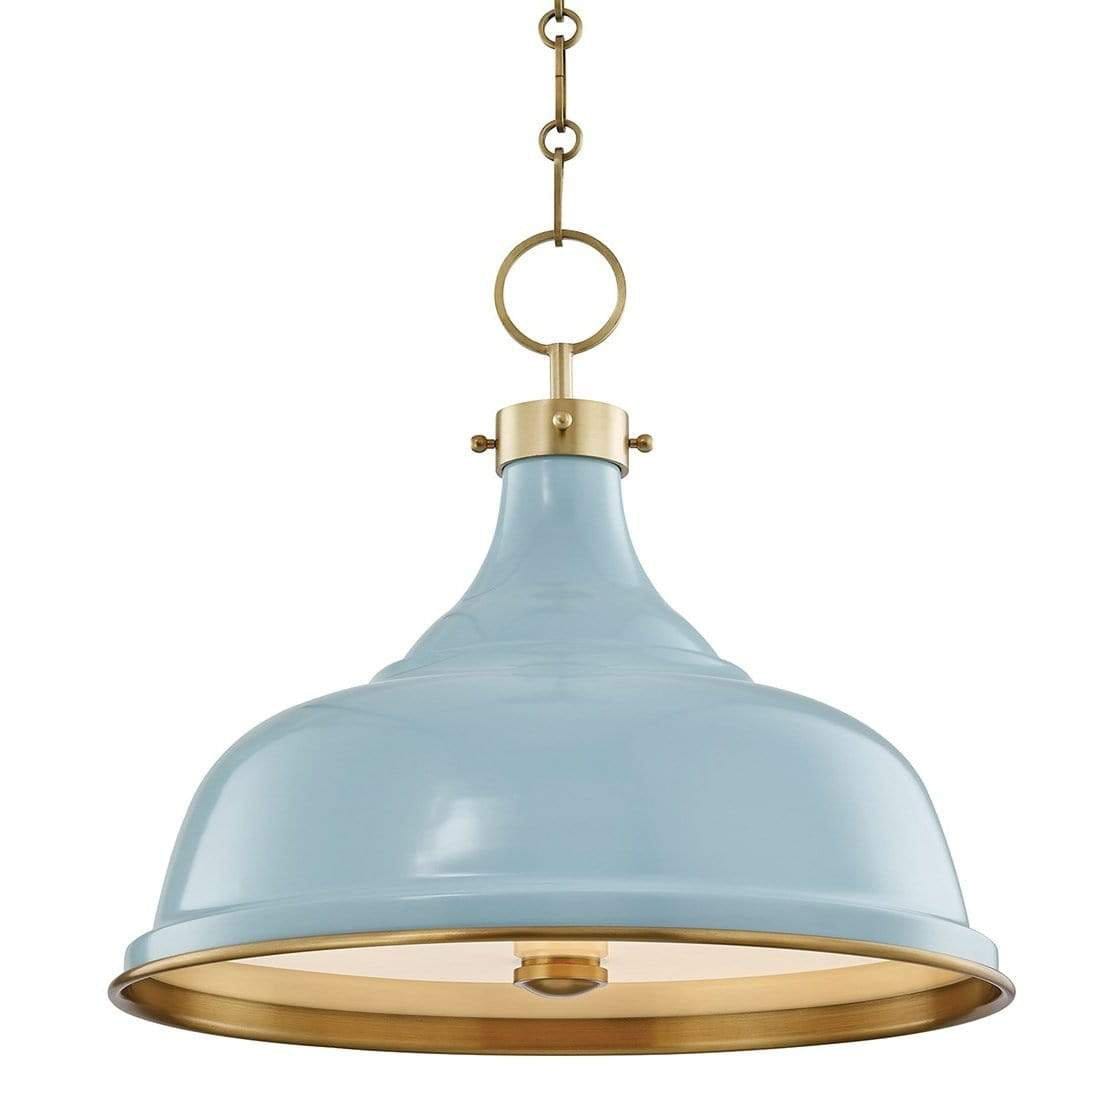 Mark D. Sikes Painted No. 1 Pendant Lighting hudson-valley-MDS300-AGB/BB hudson-valley-MDS300-AGB/BB